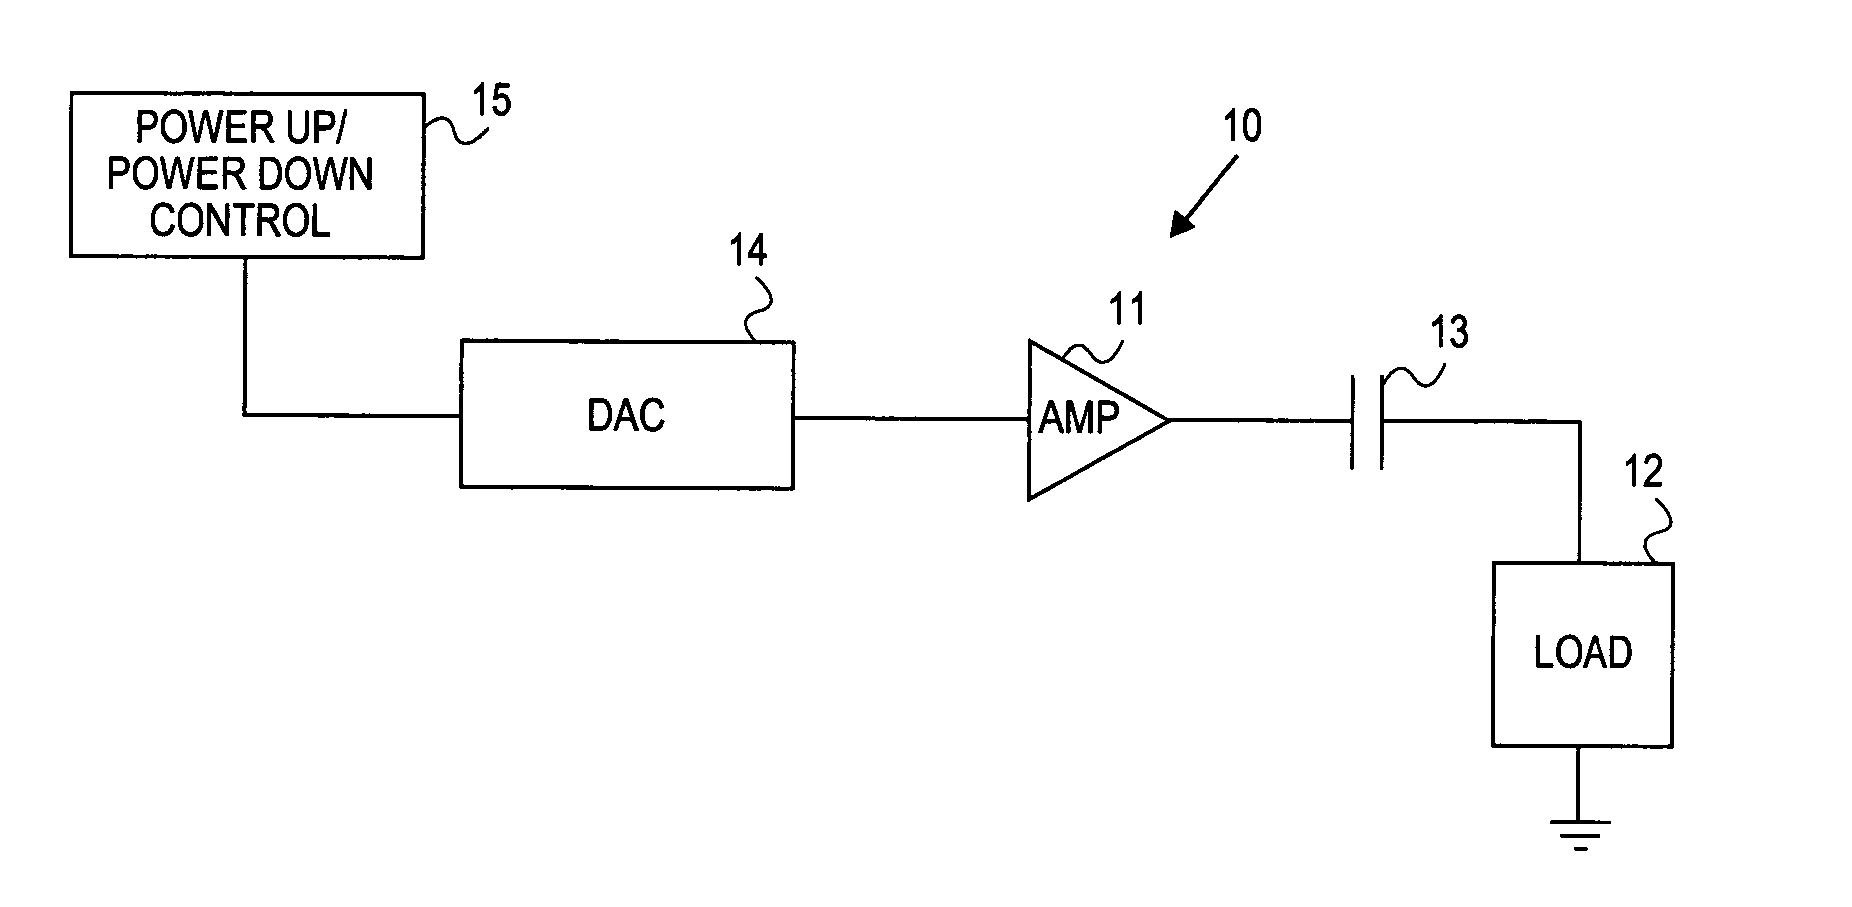 Pop and click reduction using DAC power up and power down processing